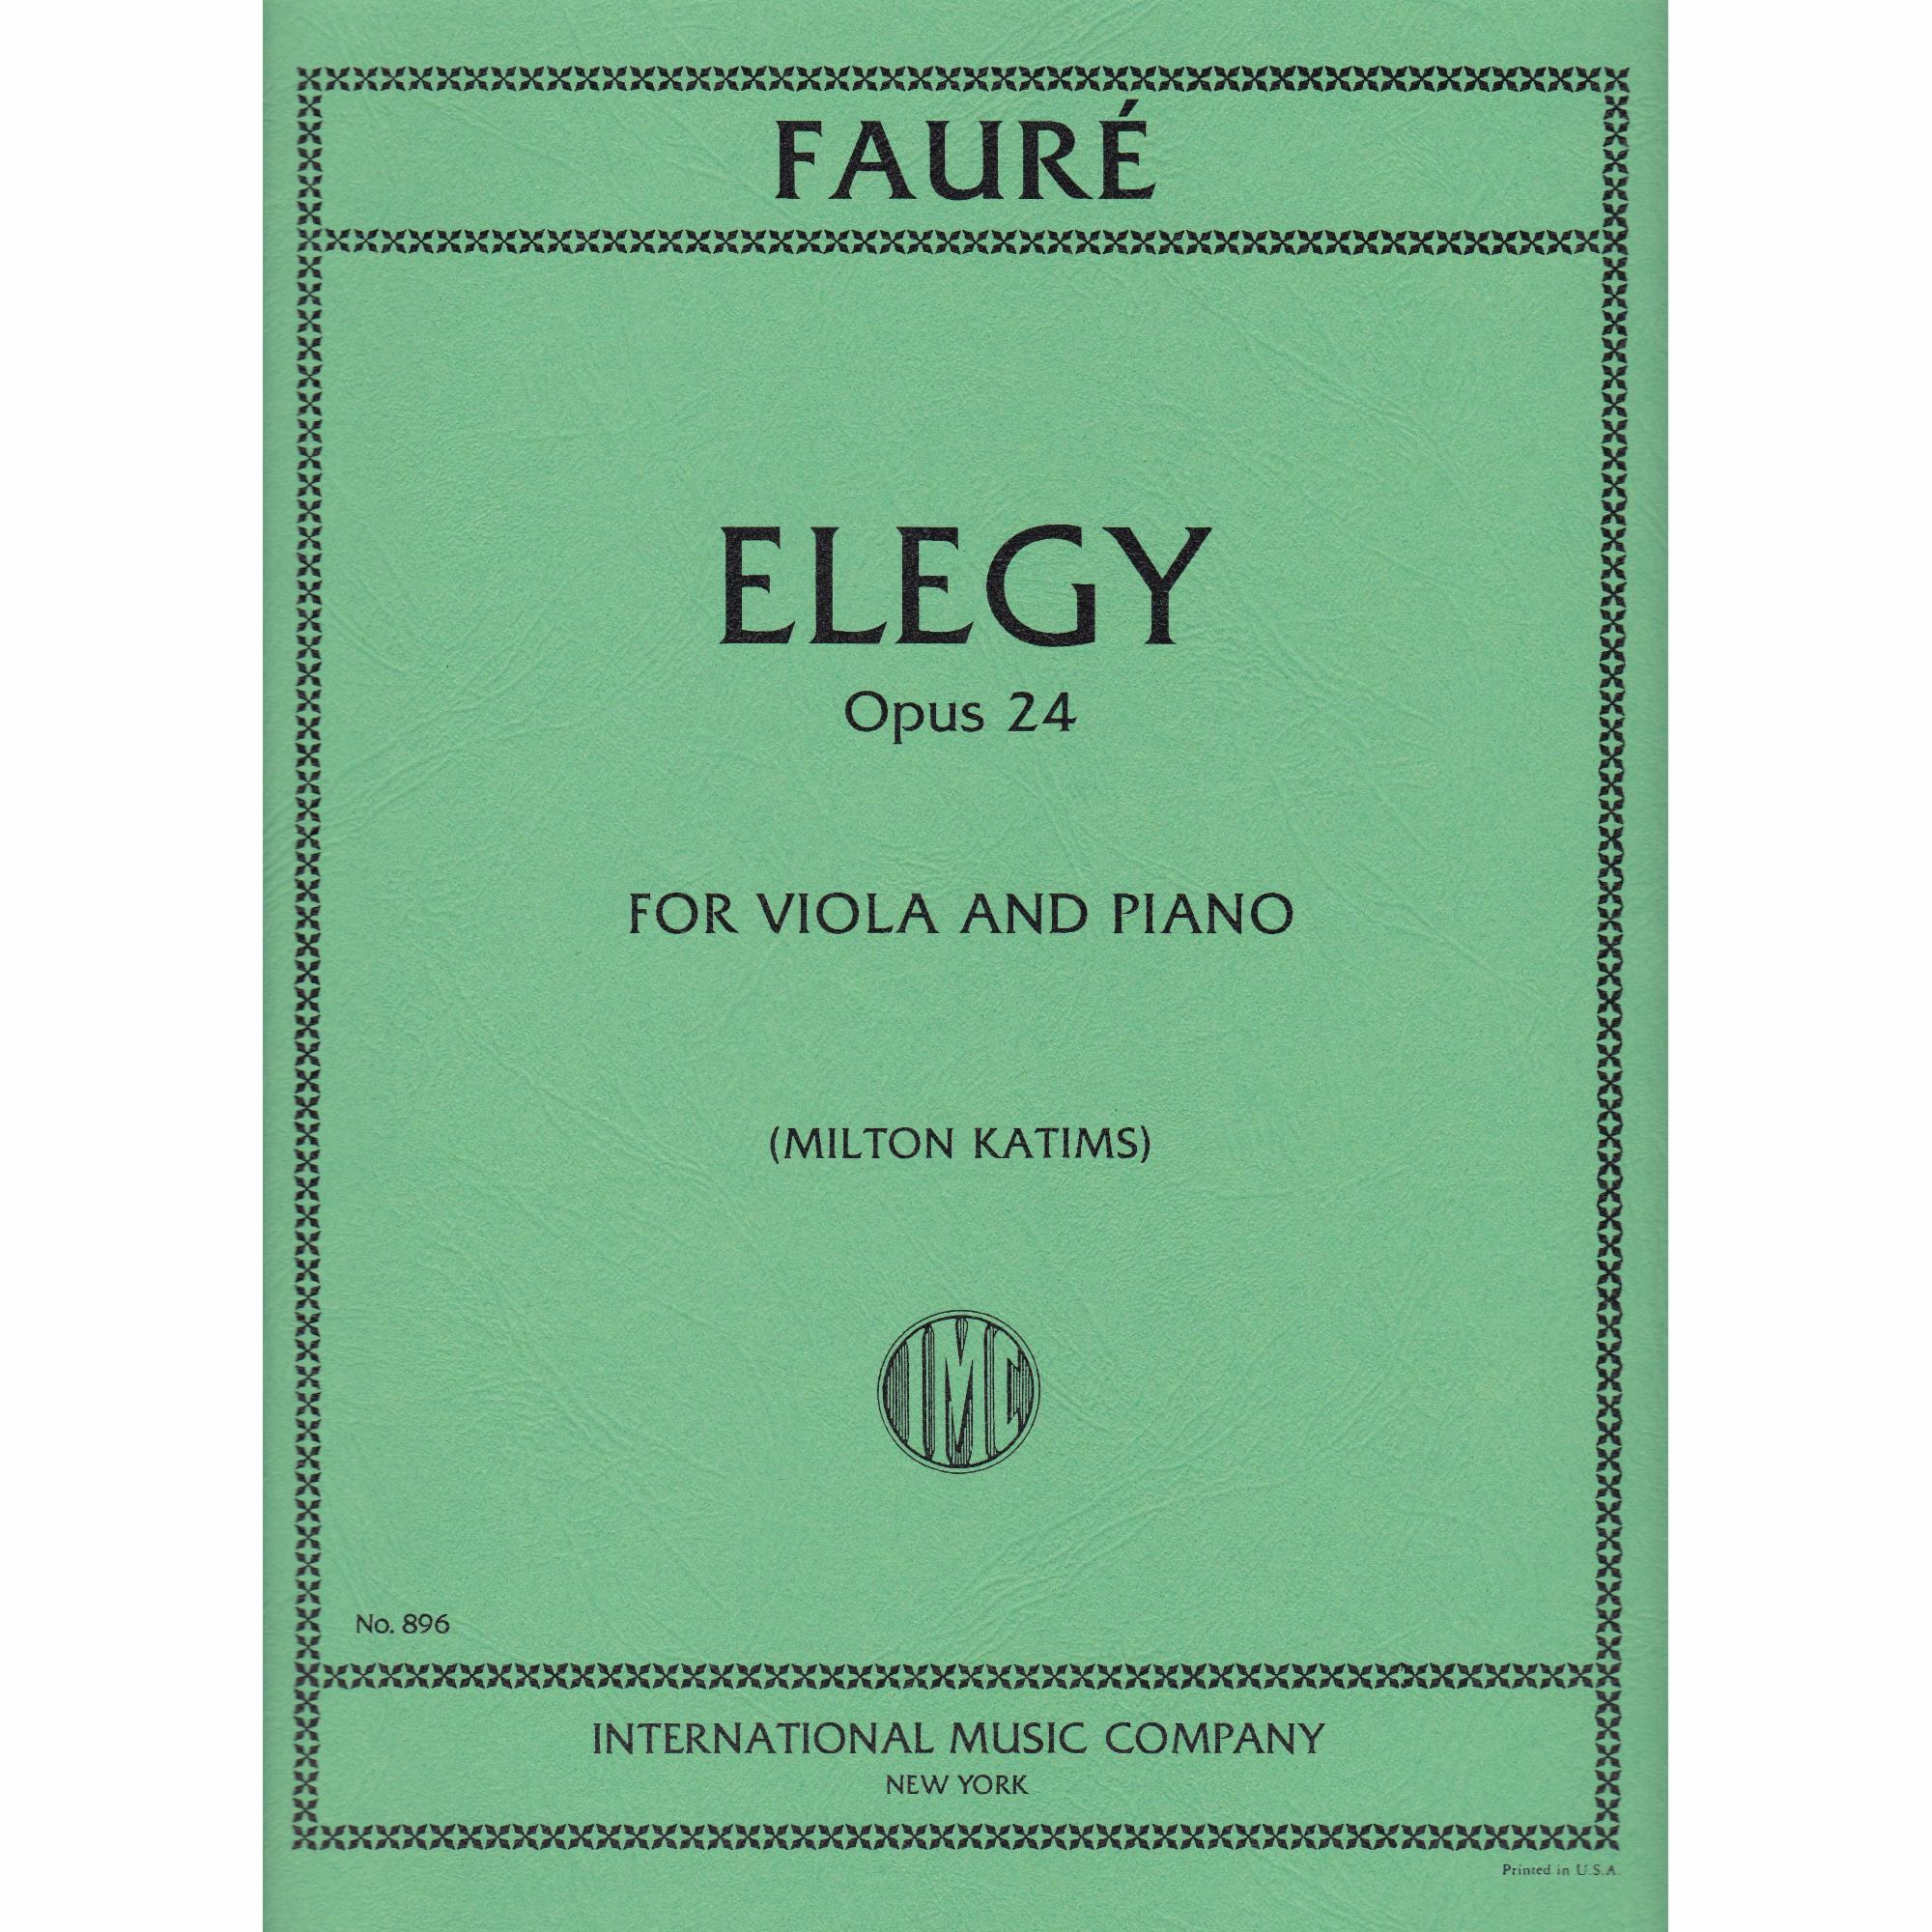 Elegy for Viola and Piano, Op. 24